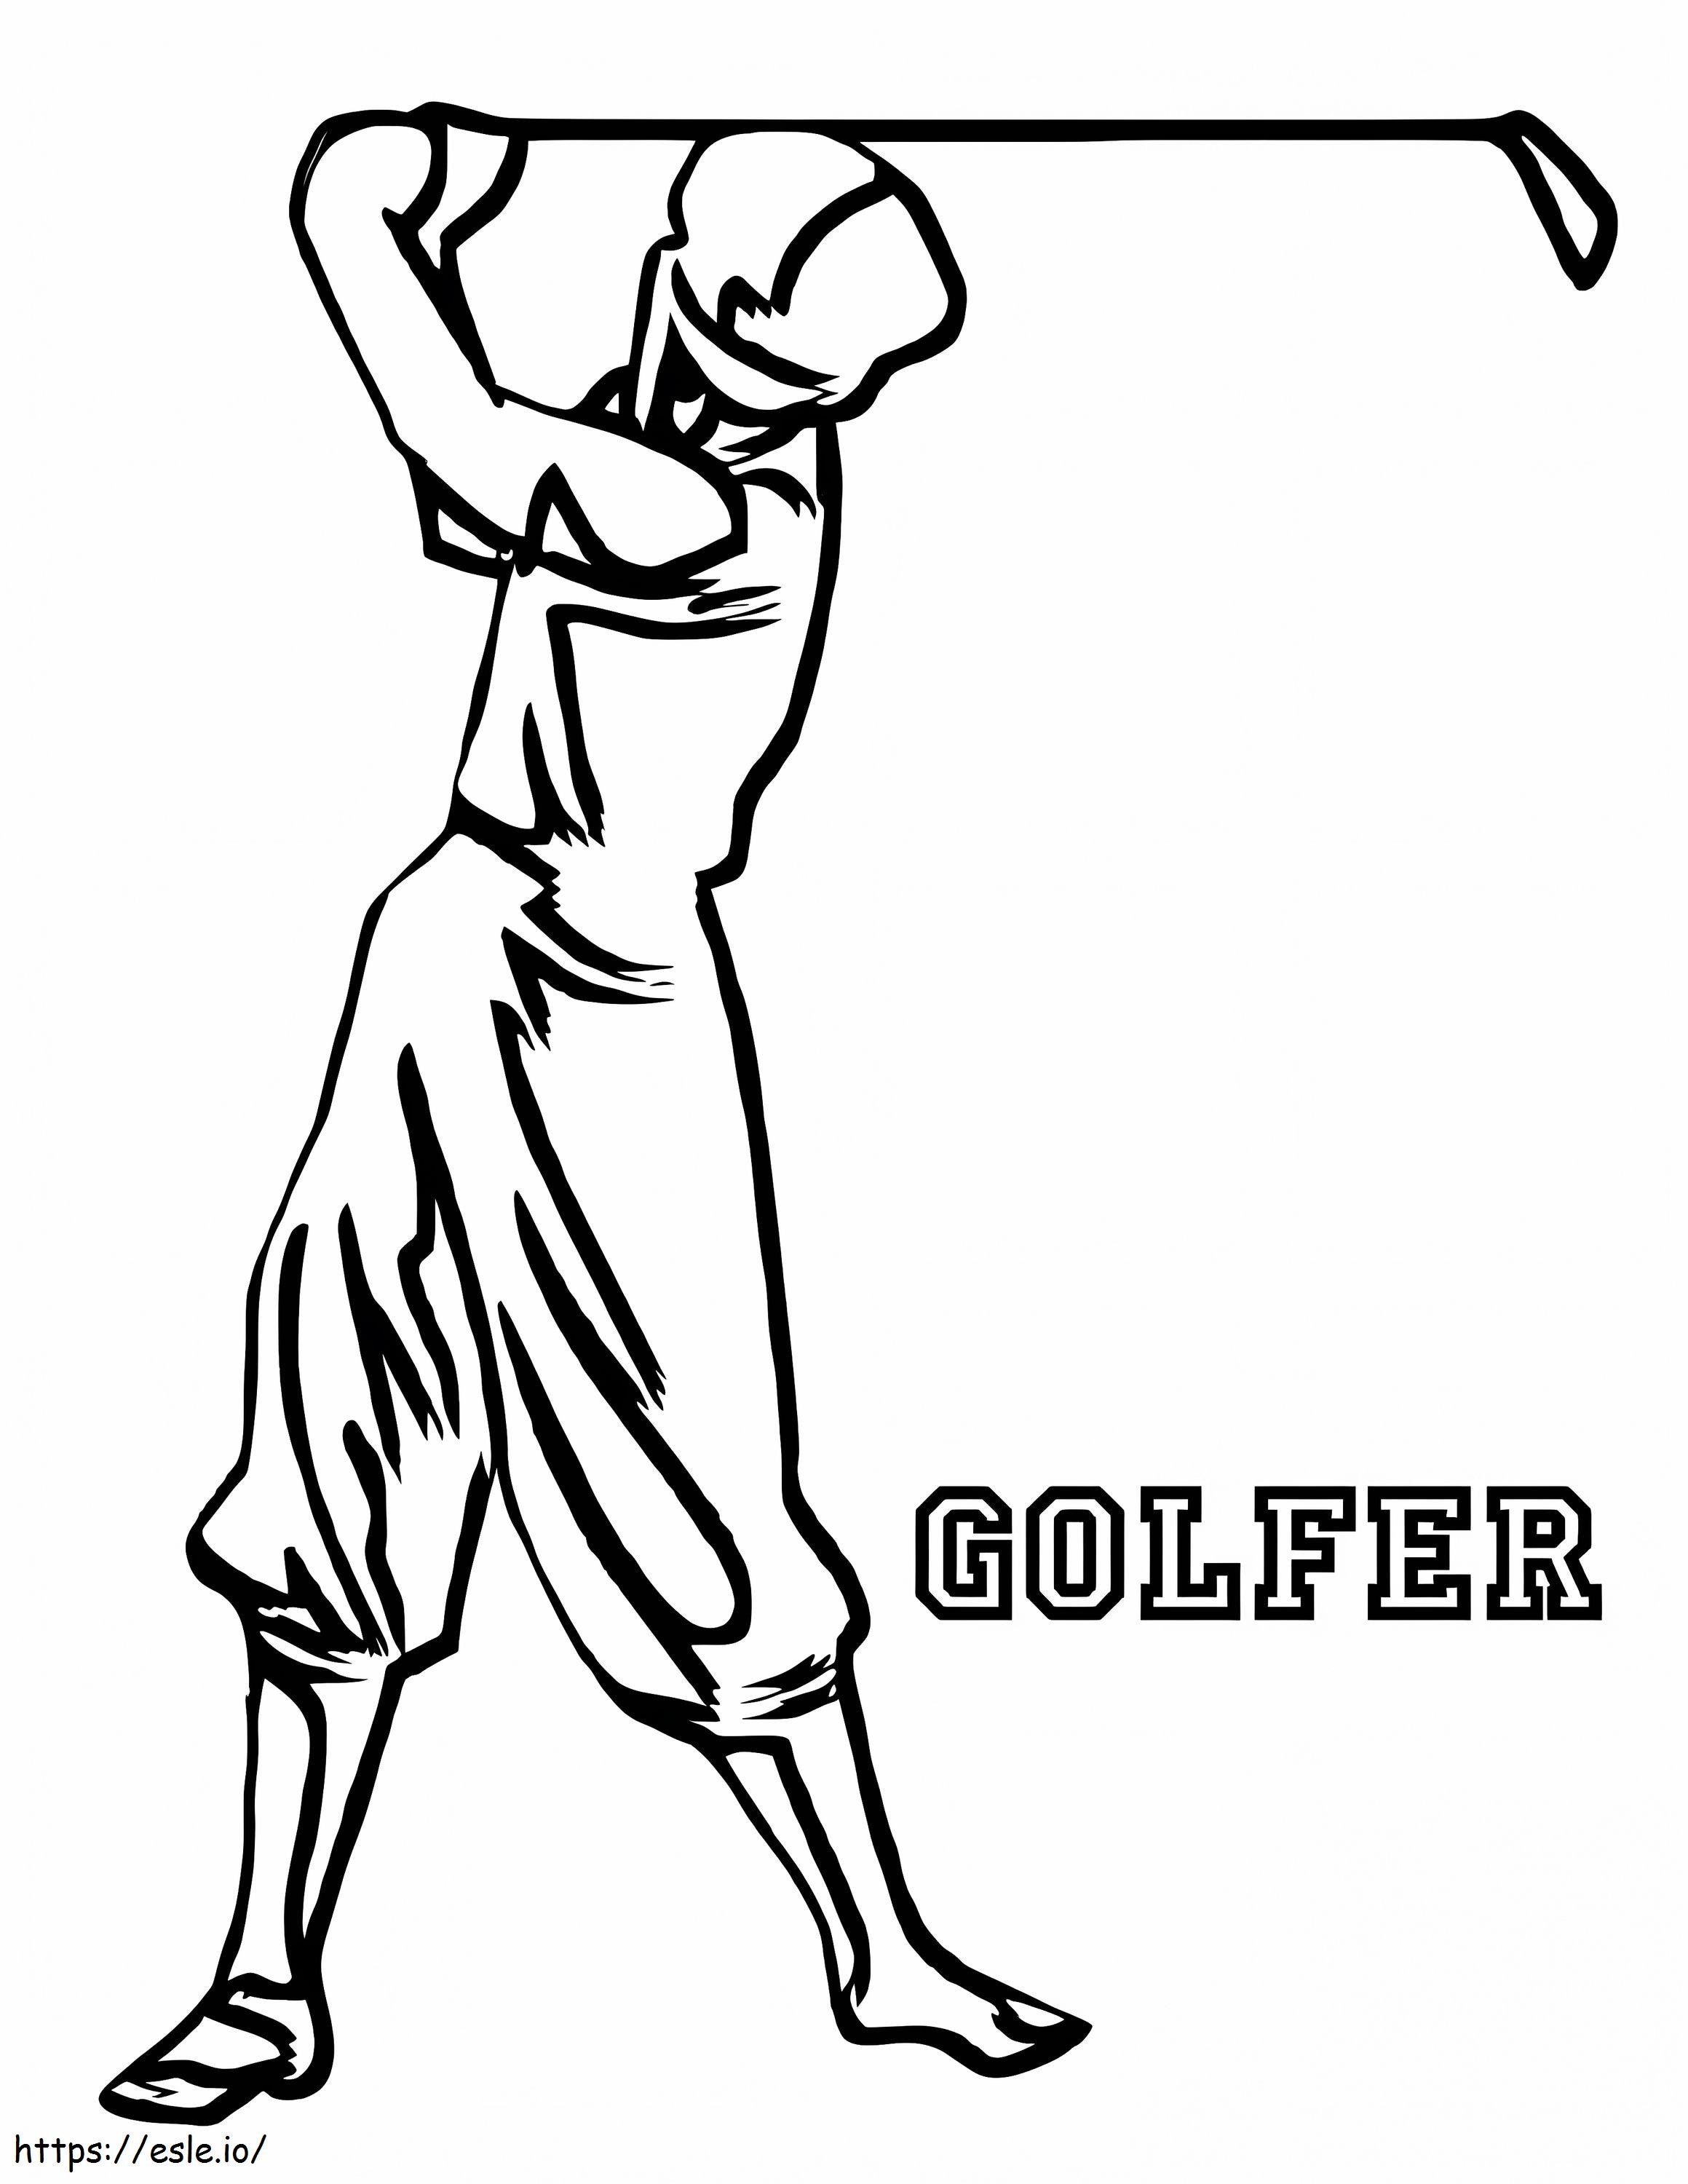 Golfer coloring page